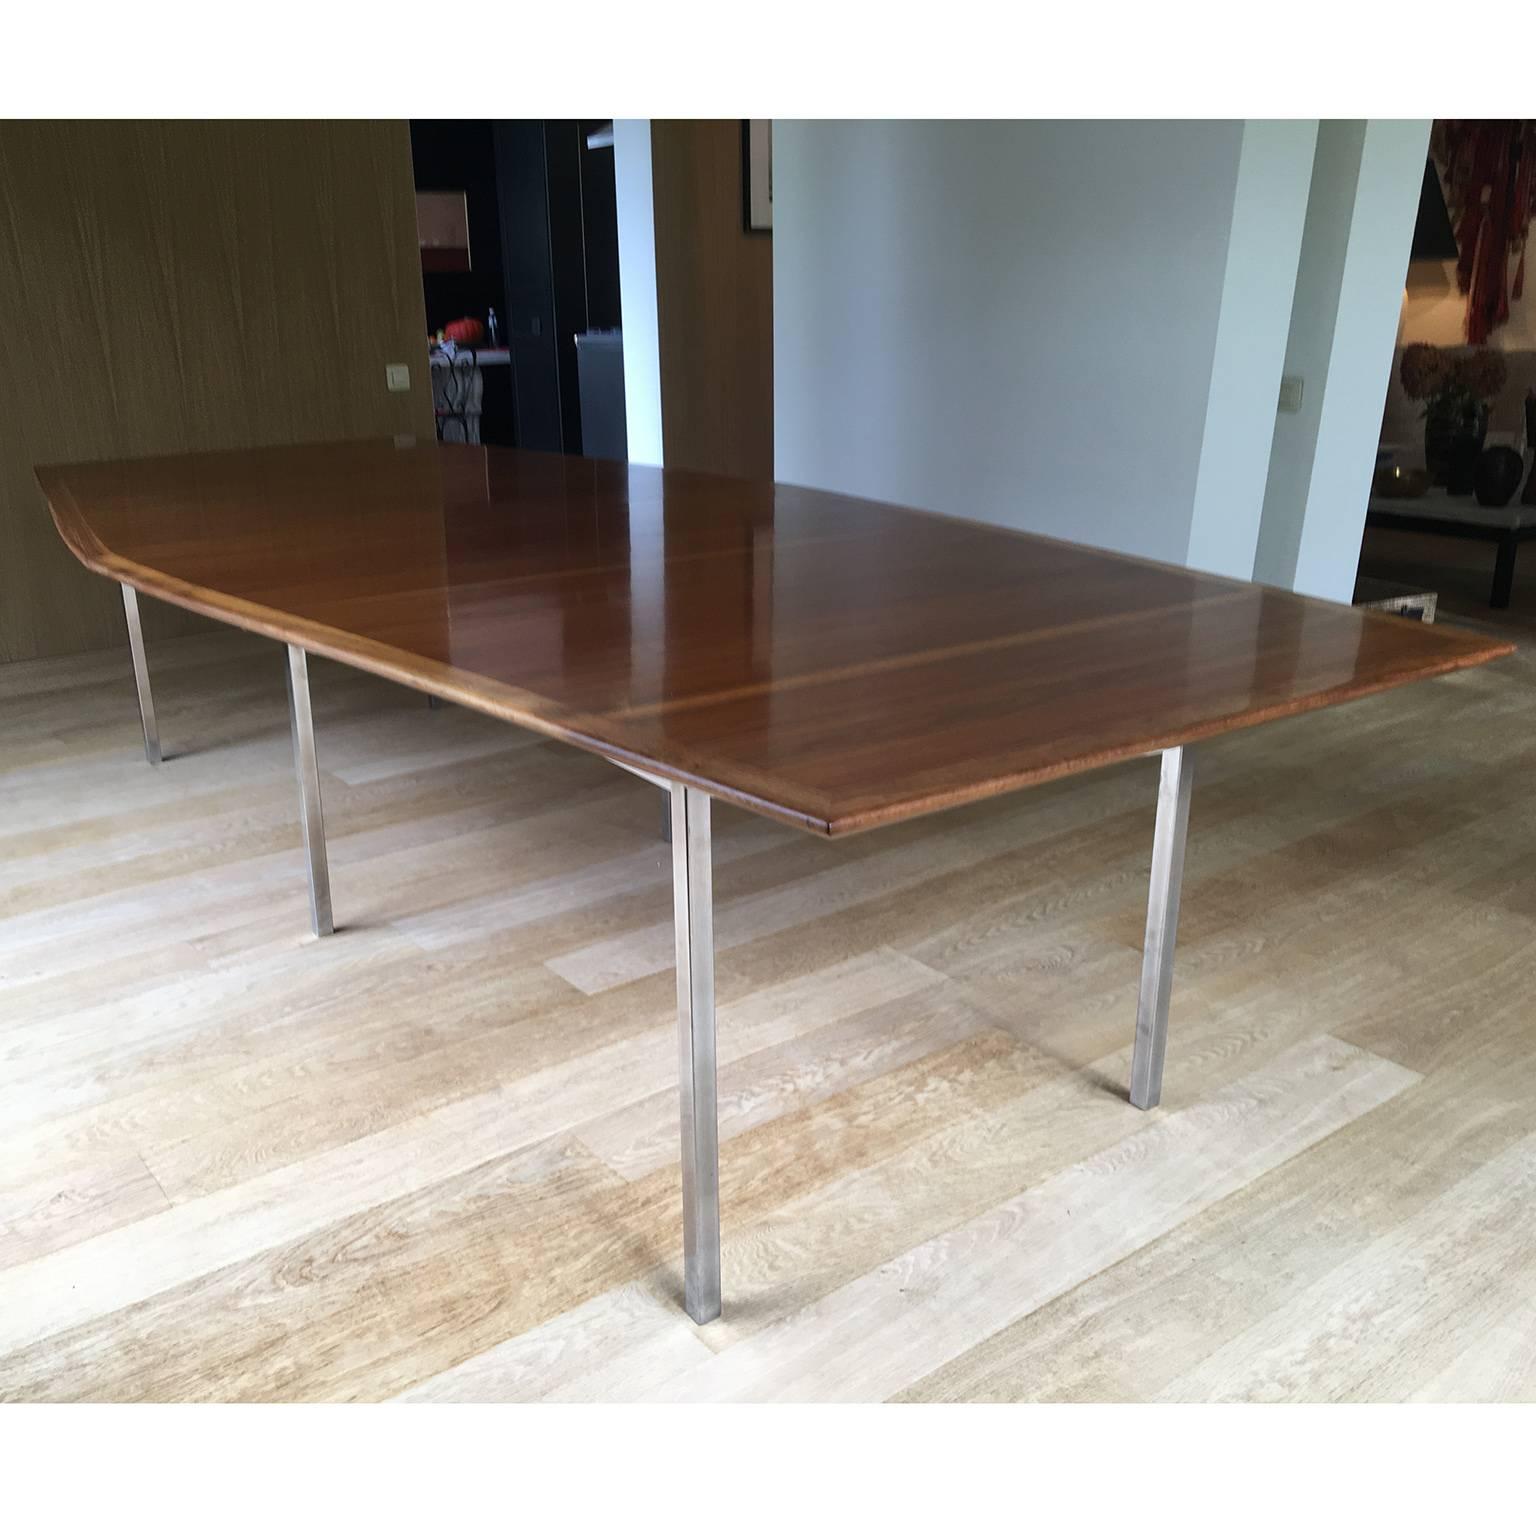 Walnut top boat shaped table on square tube polished chrome legs. Made by Knoll International.